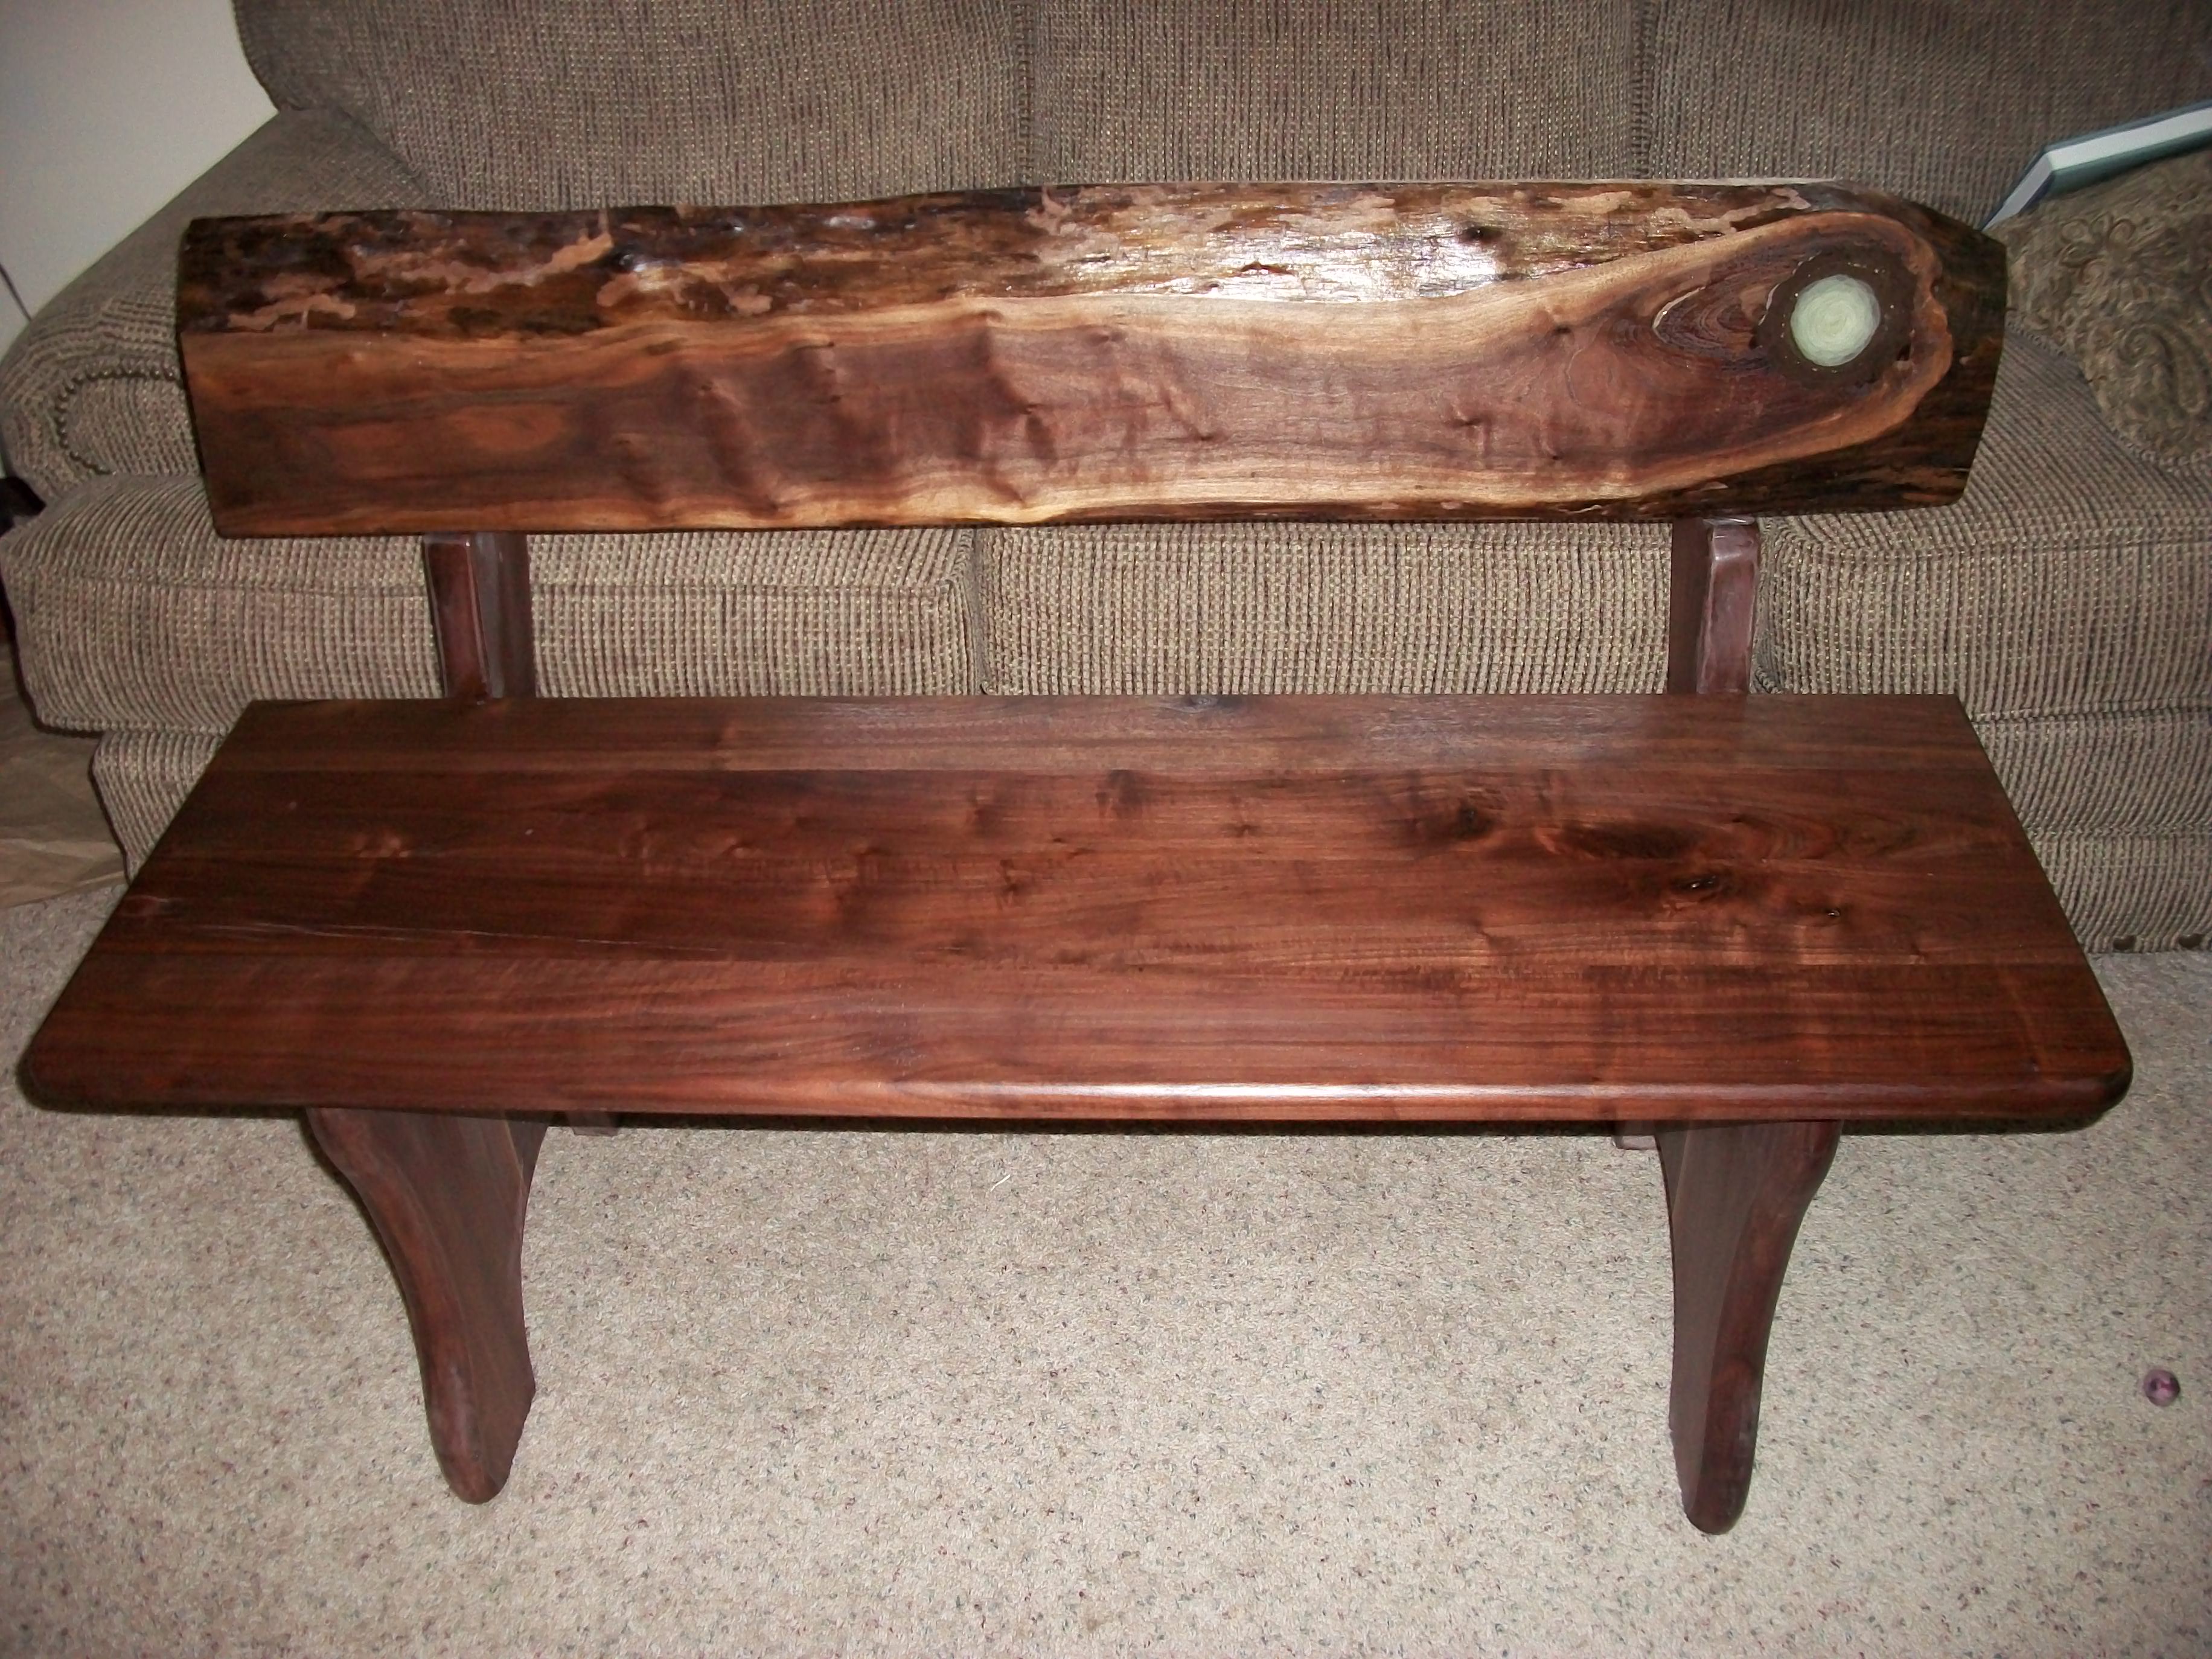 front view of the bench